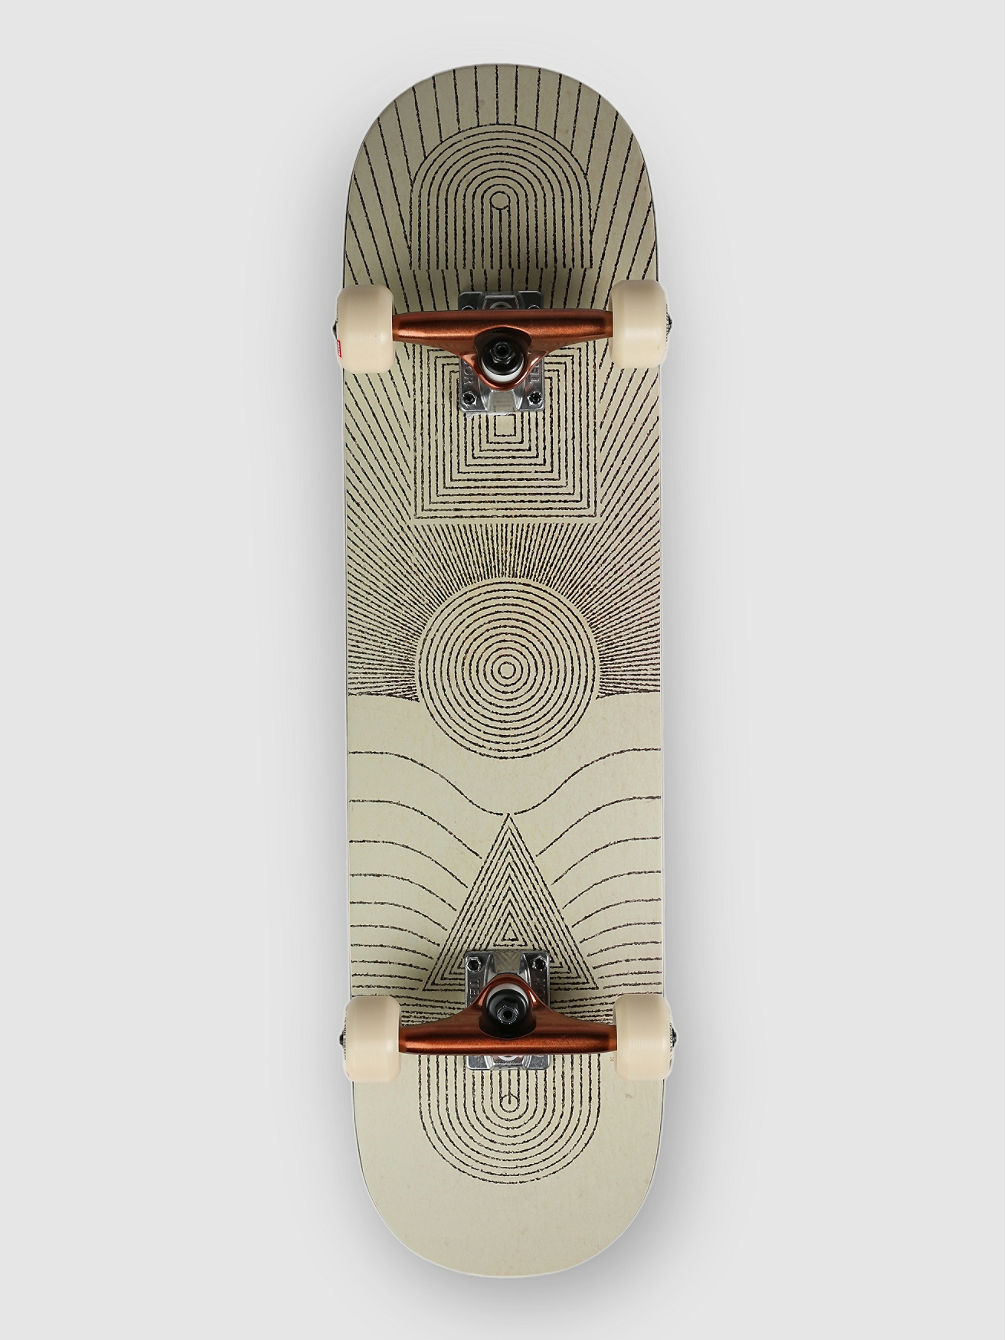 G2 Real Fun, WOW! 8.0&amp;#034; Skate Completo